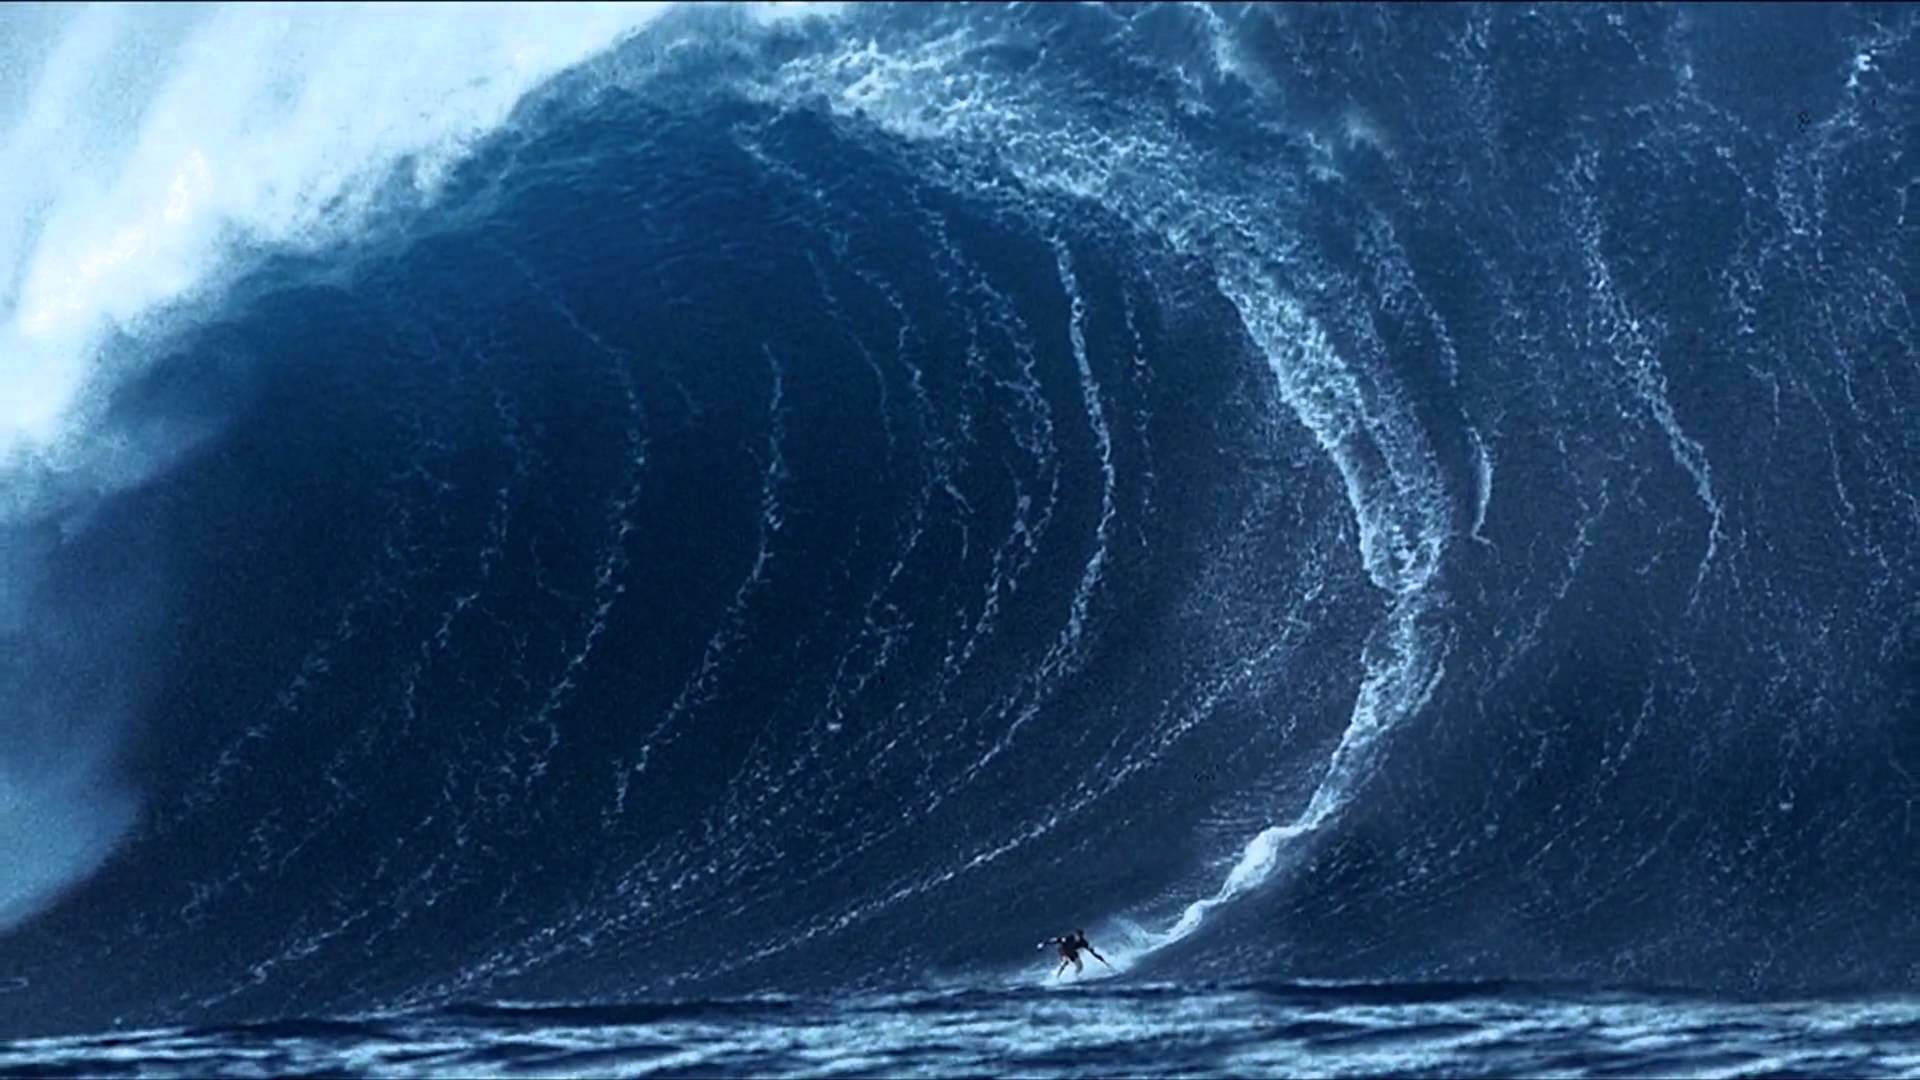 Biggest Wave Ever Surfed in the World